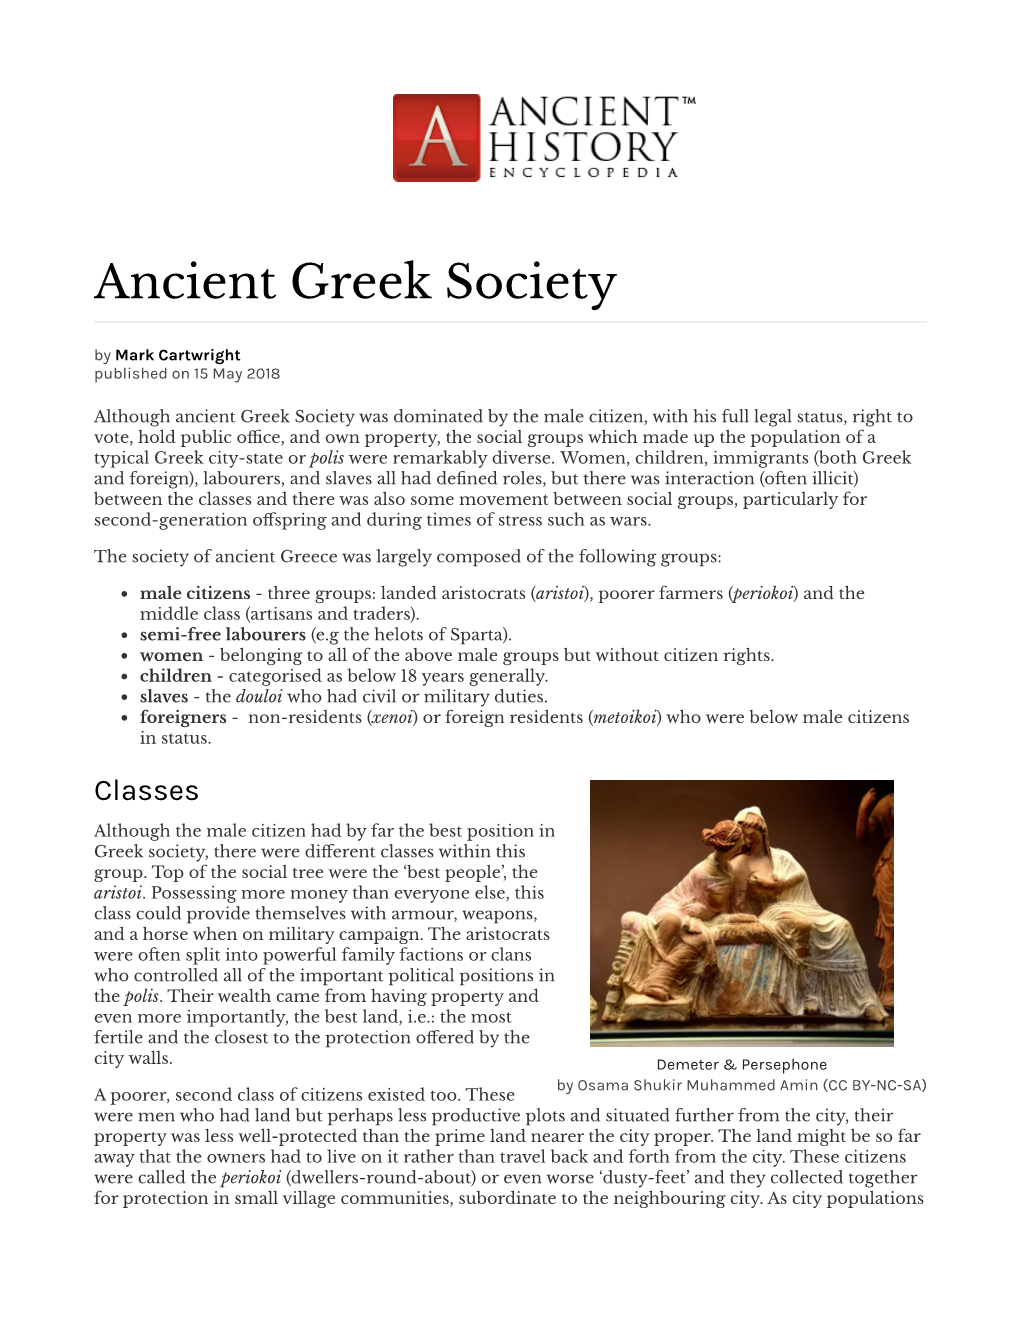 Ancient Greek Society by Mark Cartwright Published on 15 May 2018